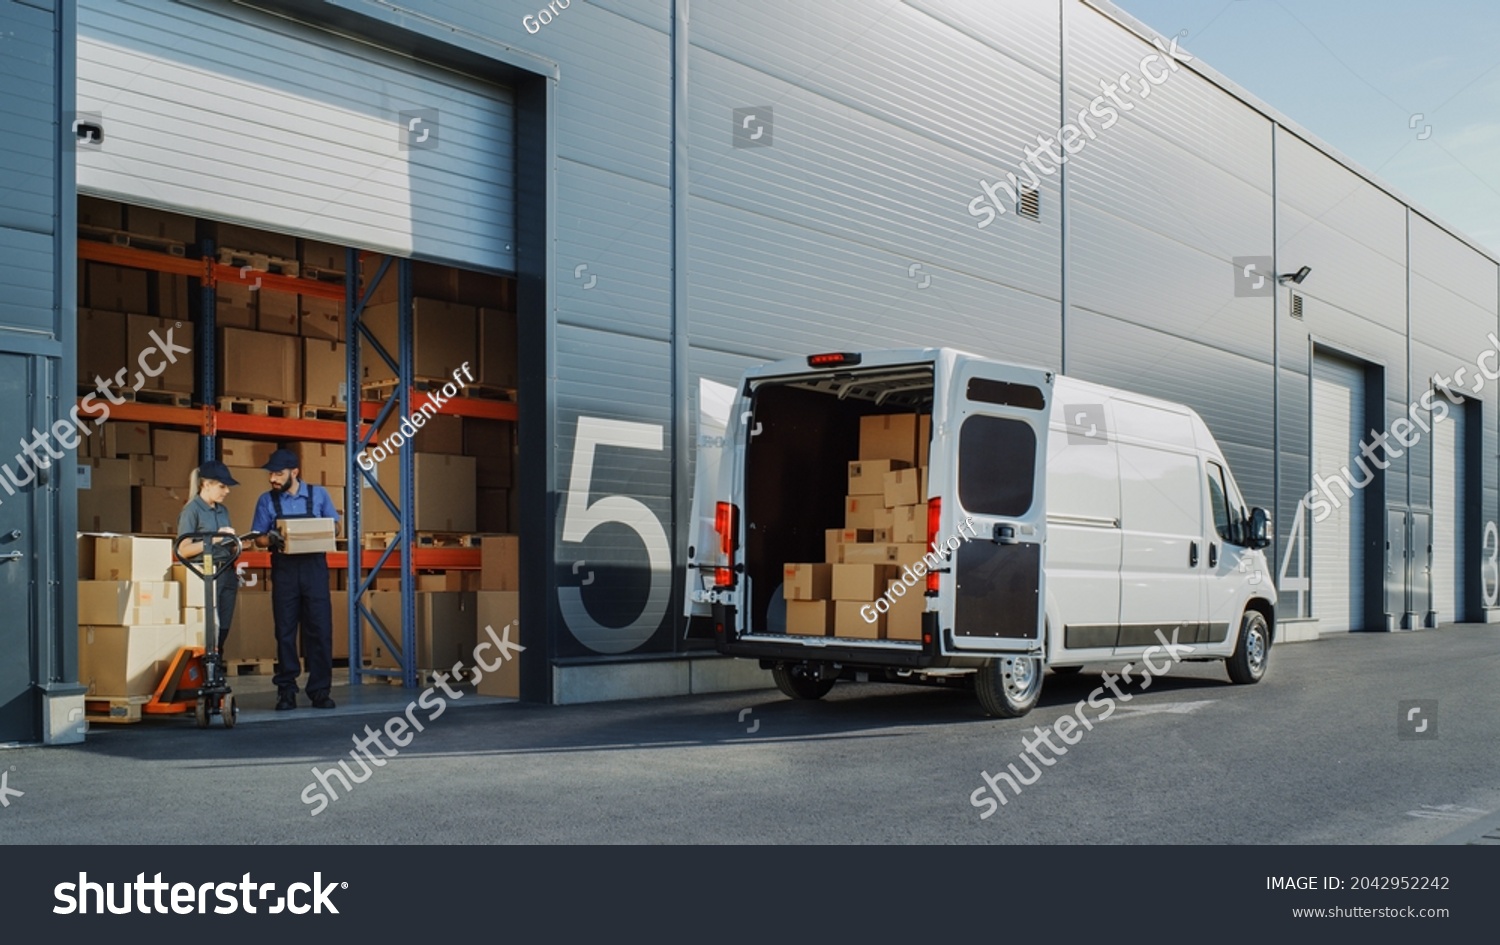 Outside of Logistics Warehouse with Open Door, Delivery Van Loaded with Cardboard Boxes. Truck Delivering Online Orders, Purchases, E-Commerce Goods, Wholesale Merchandise. #2042952242